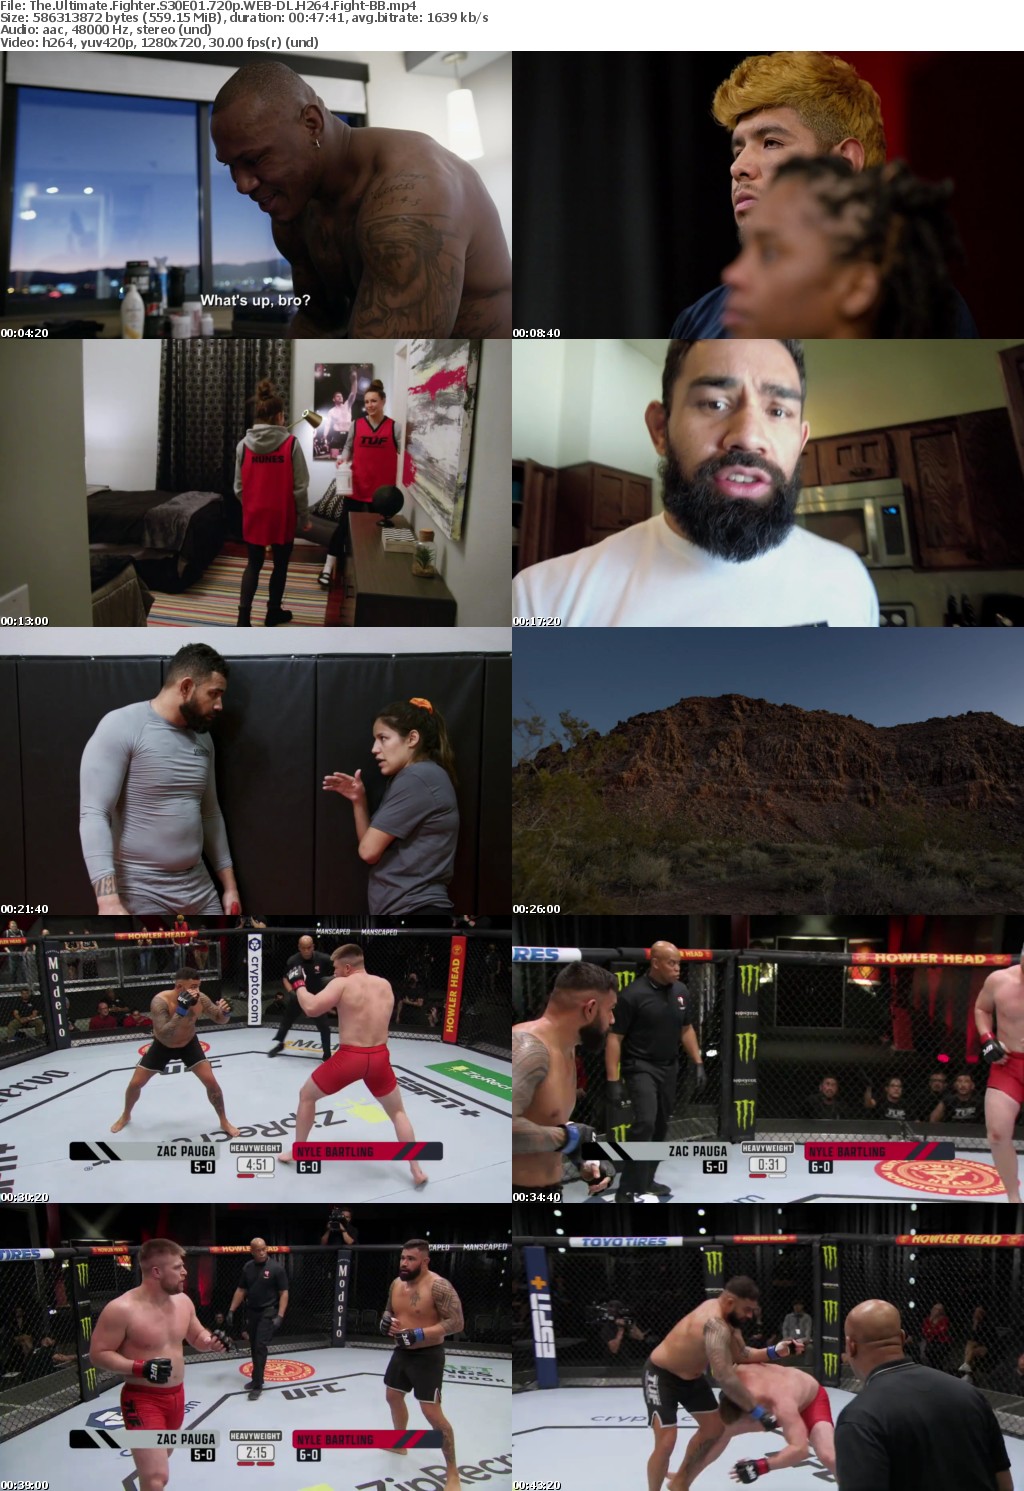 The Ultimate Fighter S30E01 720p WEB-DL H264 Fight-BB